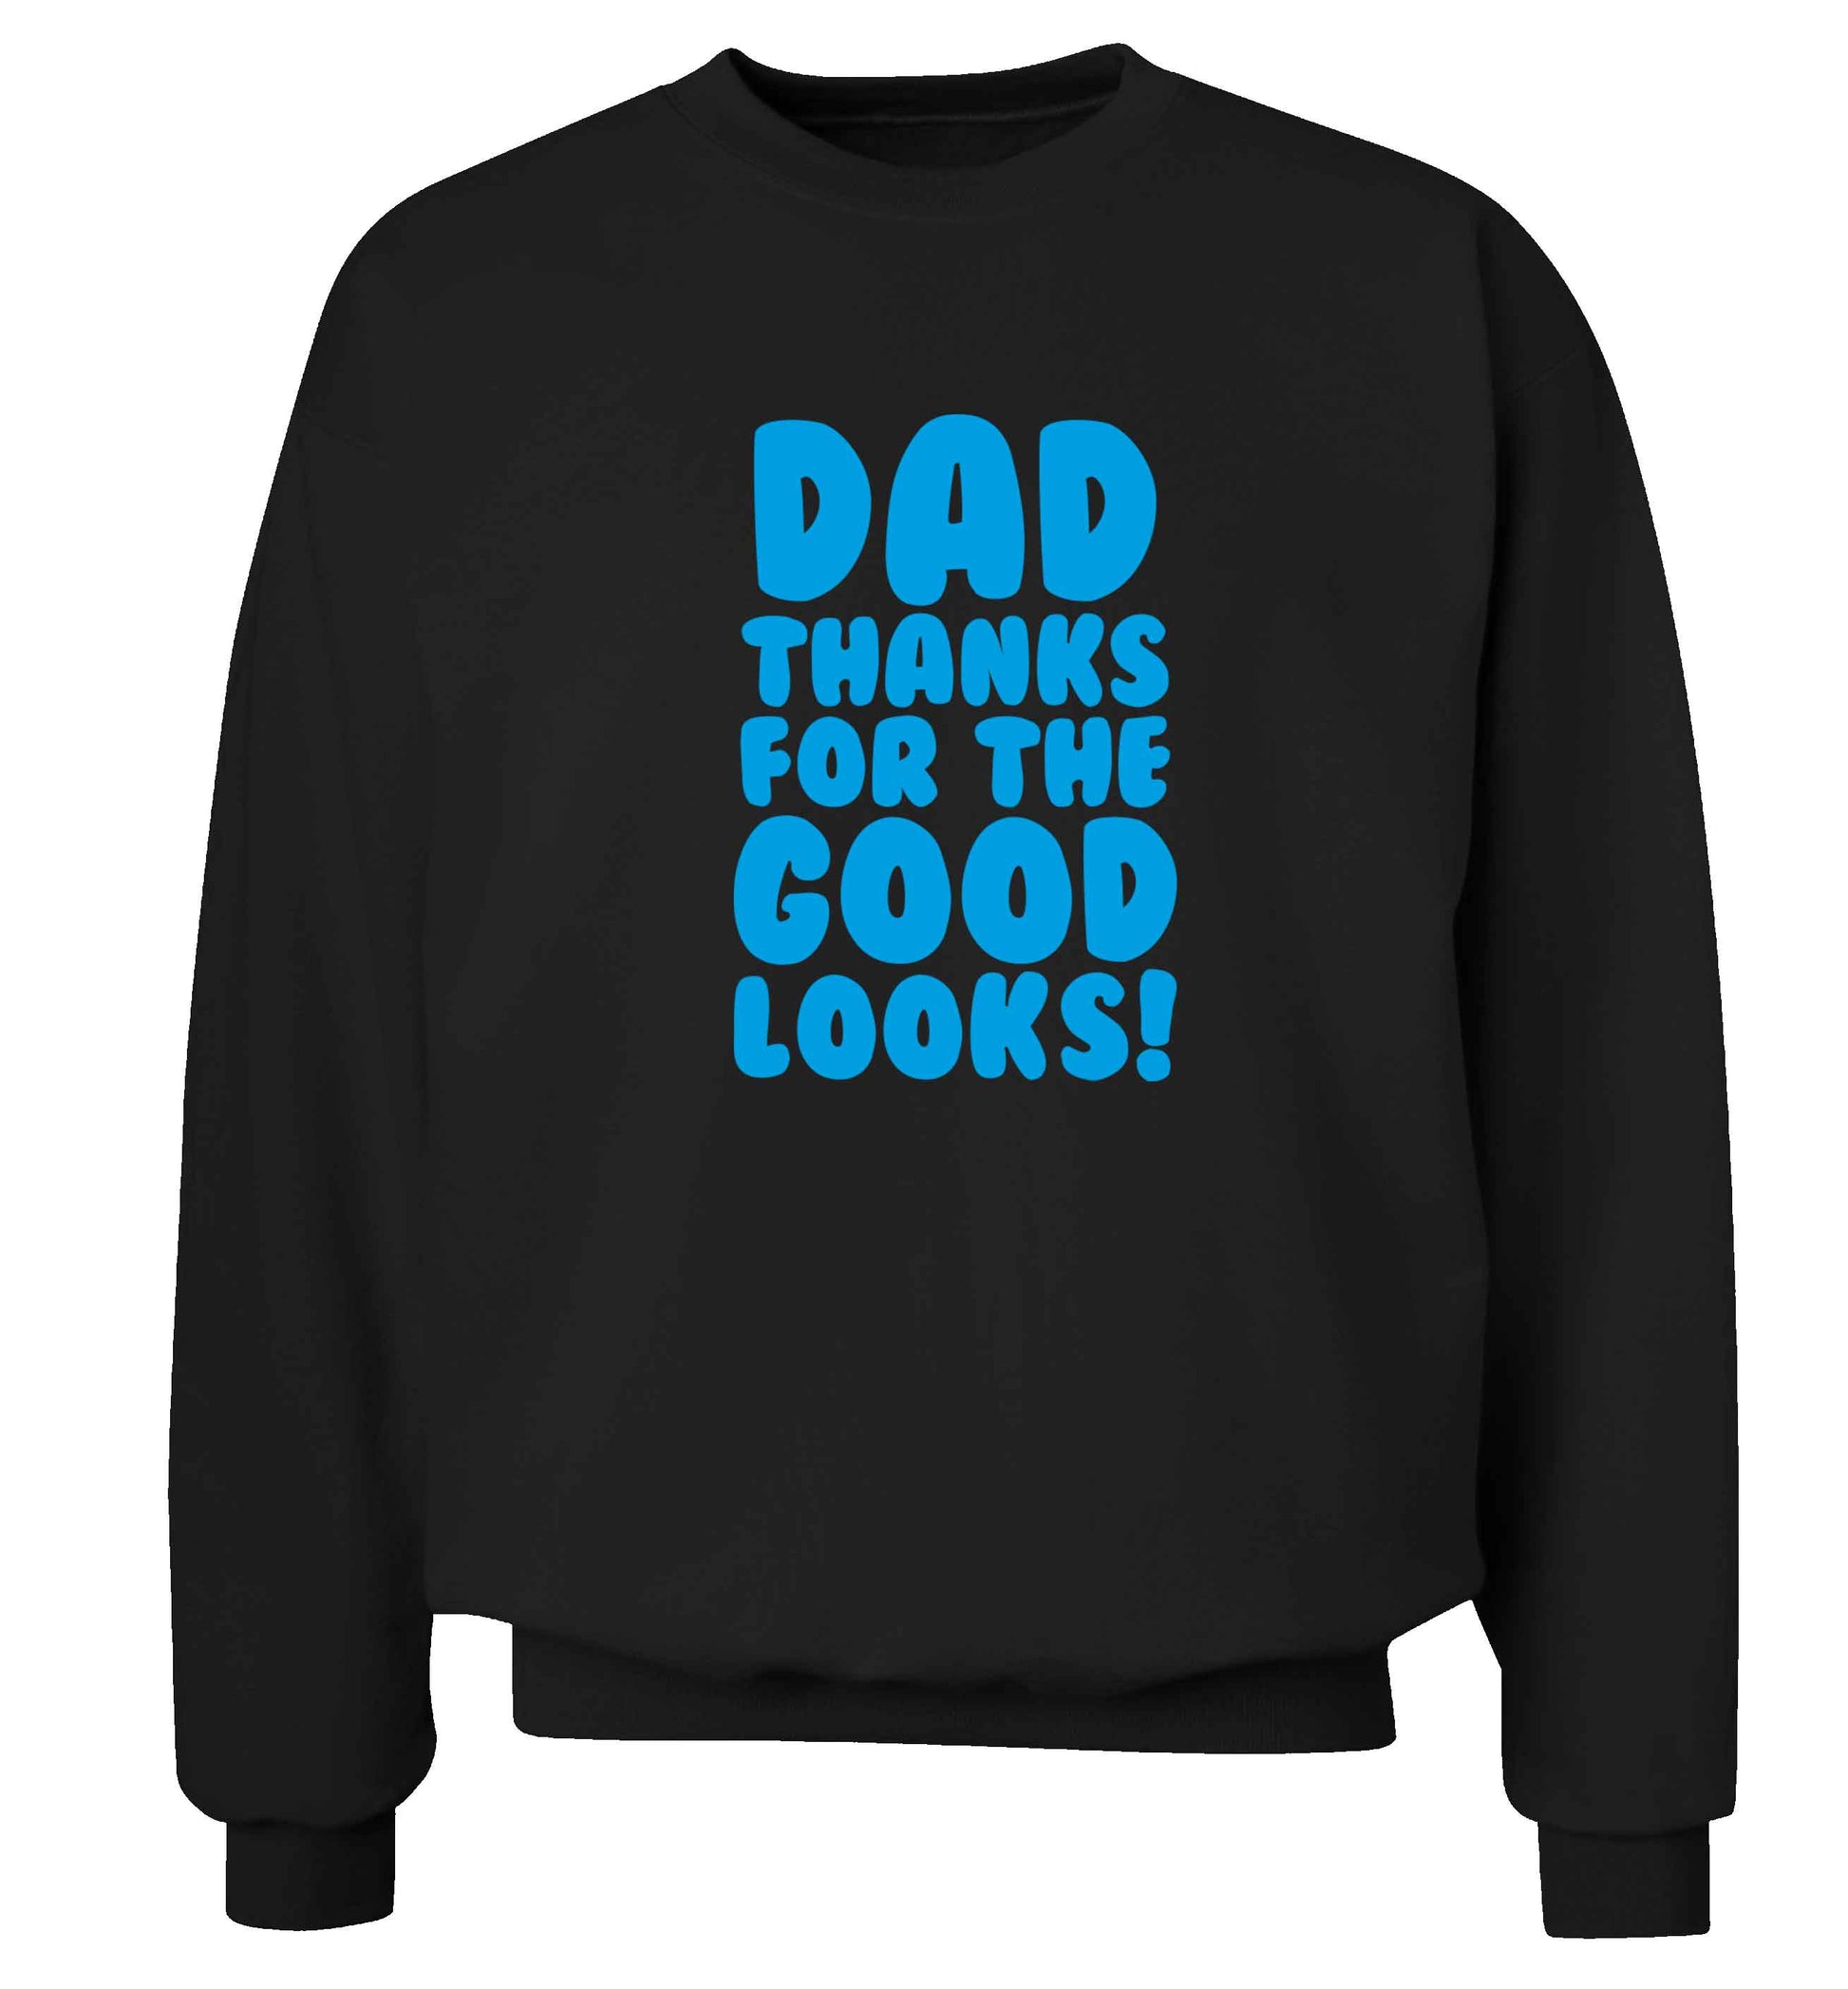 Dad thanks for the good looks adult's unisex black sweater 2XL